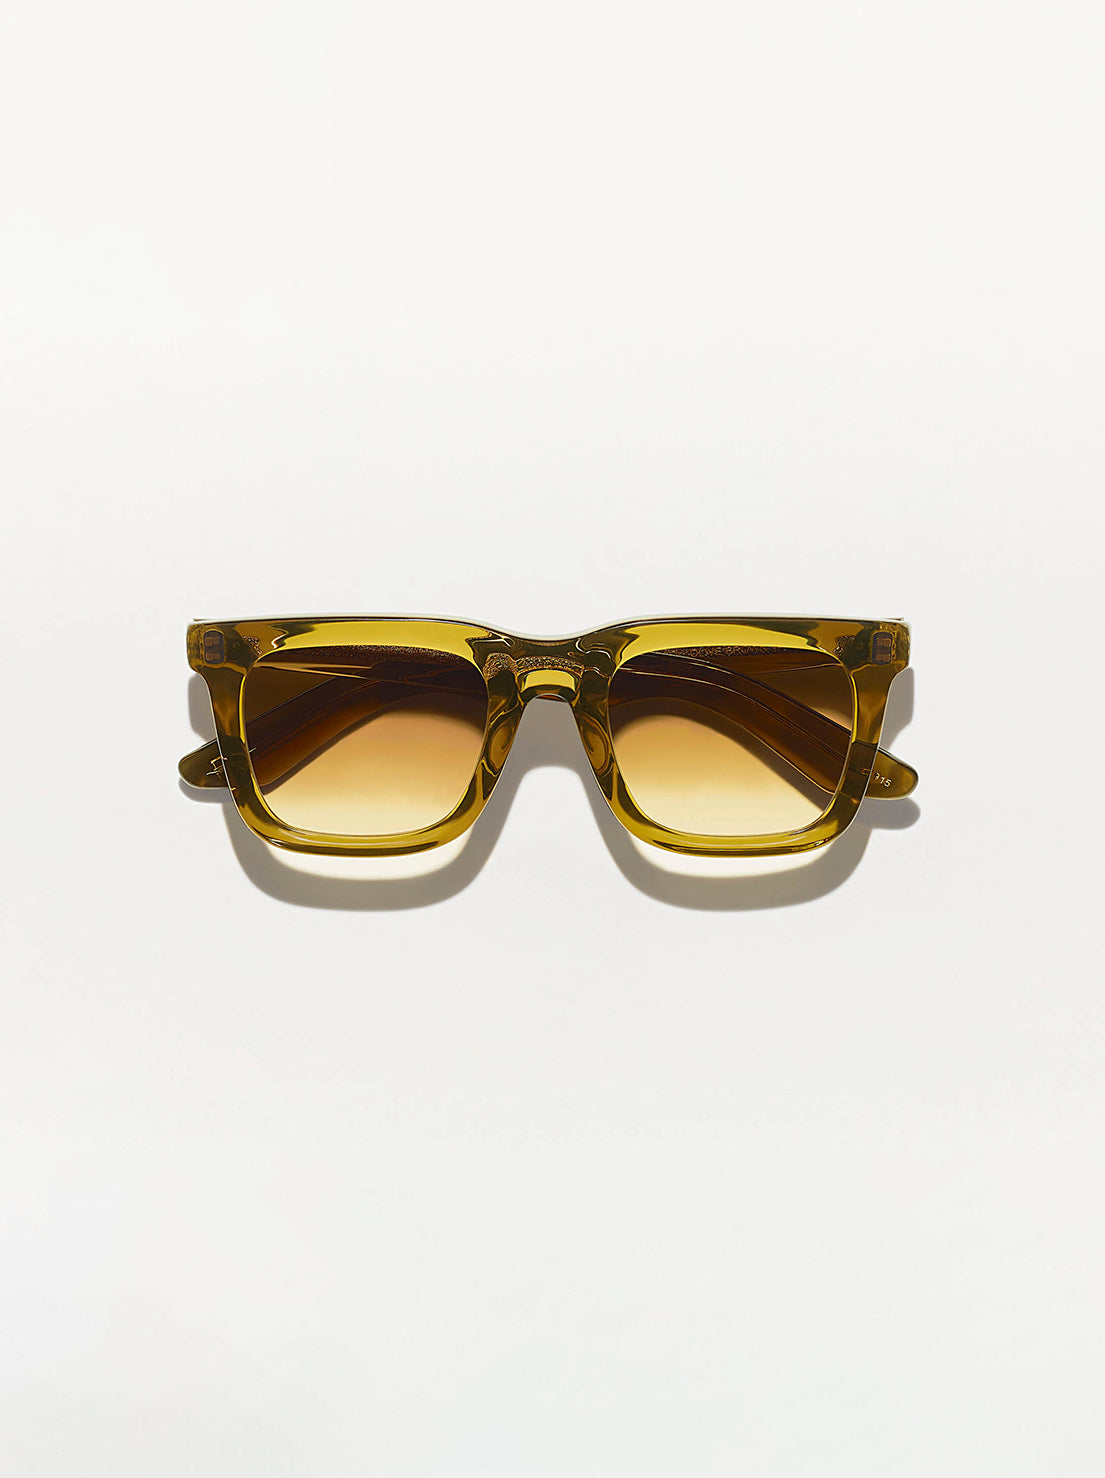 Load image into Gallery viewer, Moscot - Rizik Sunglasses in Olive Brown 49 (Reg) - Chestnut Fade Lens
